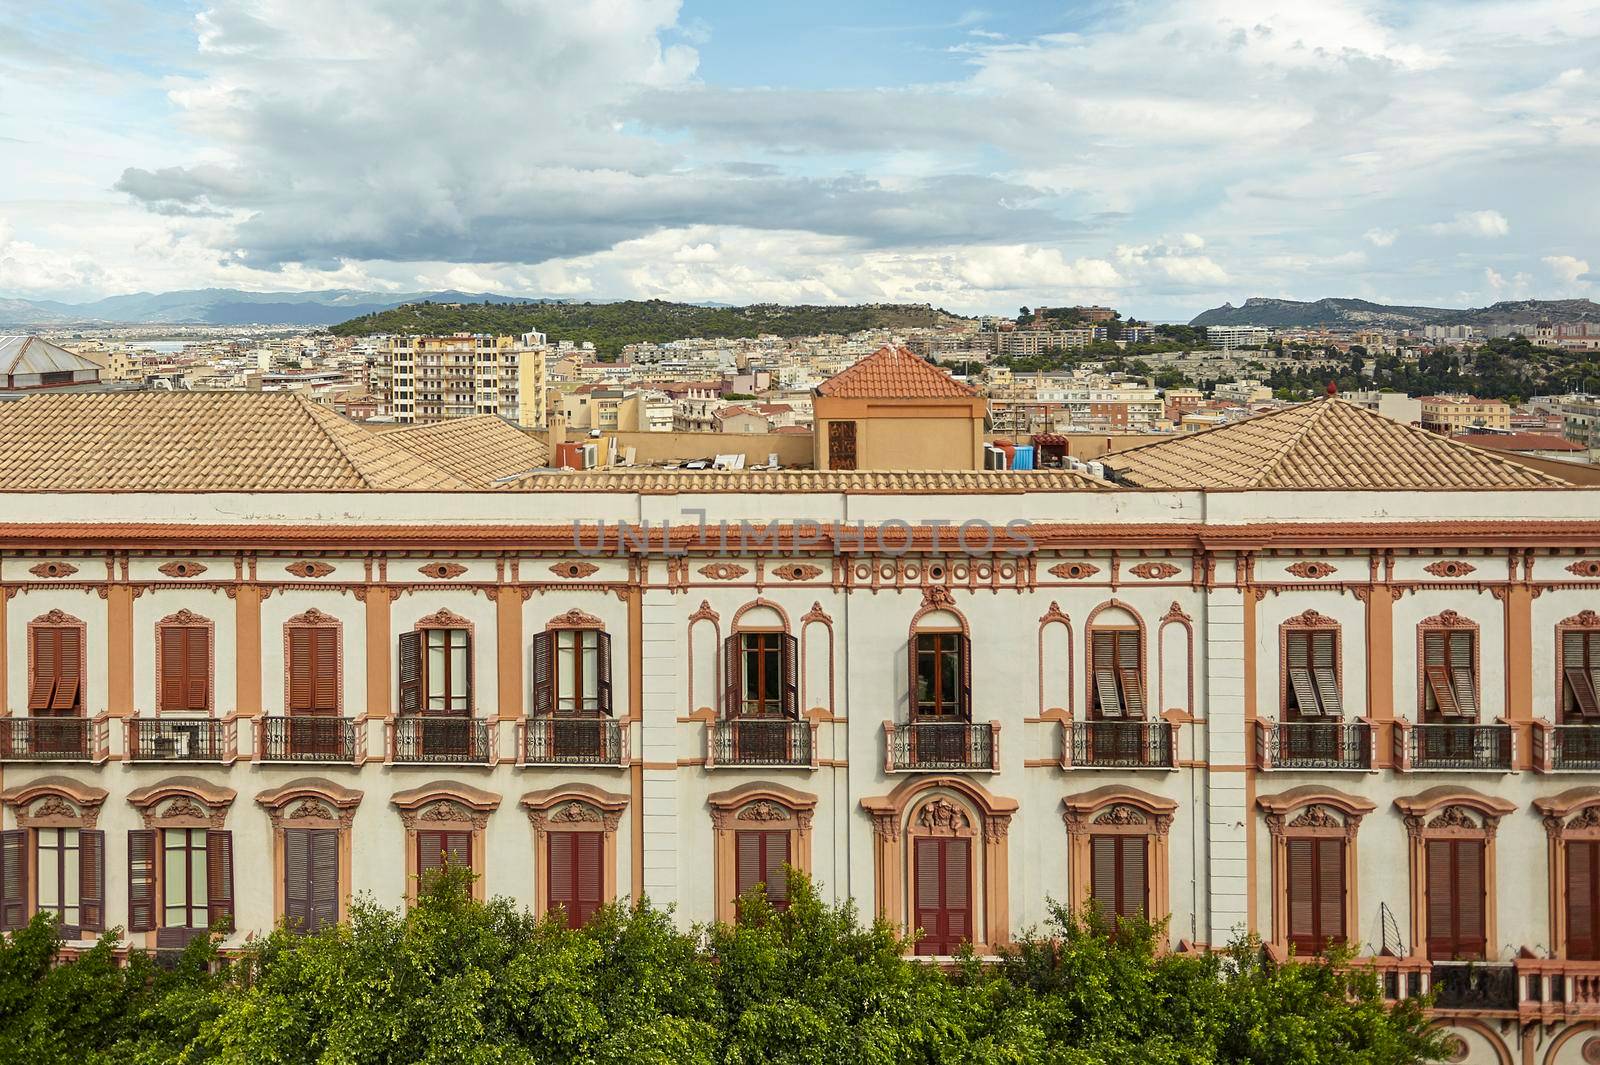 Side detail of a historic building in the city center of Cagliari in Italy, with behind the city panorama under a sky full of clouds.